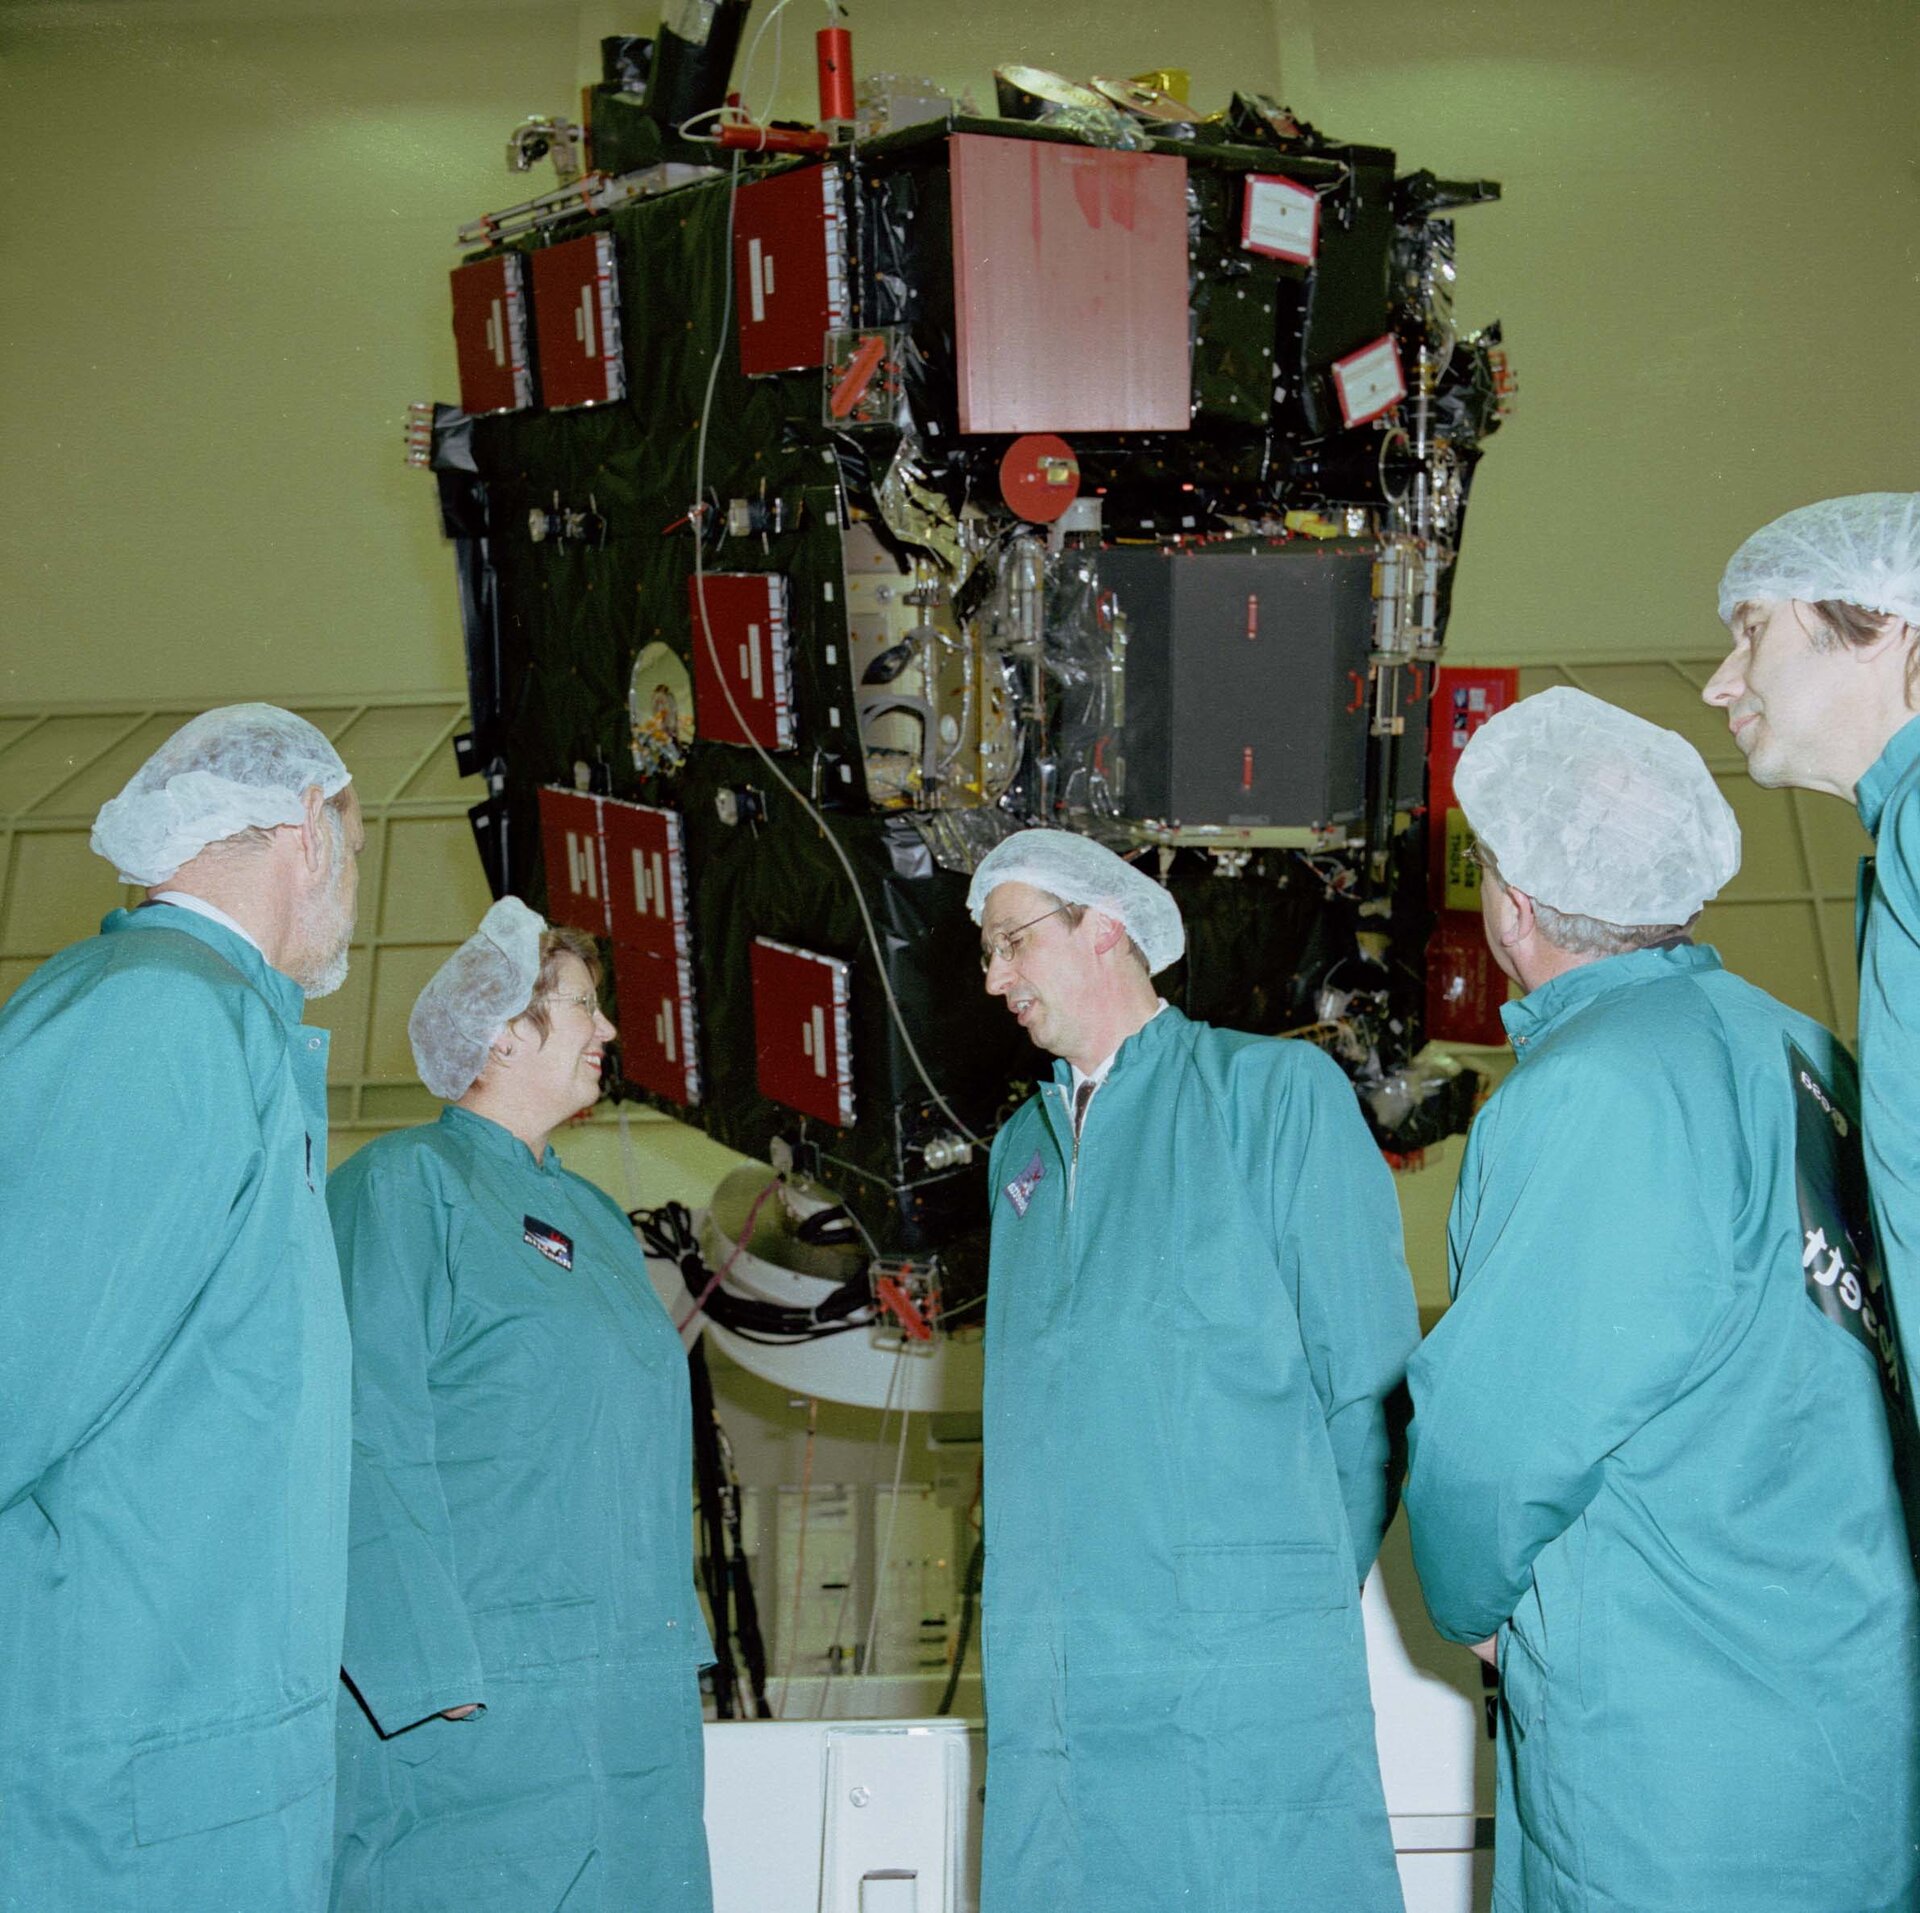 Minister Jorritsma-Lebbink inspects the Rosetta satellite on a tour of the test facilities at ESTEC